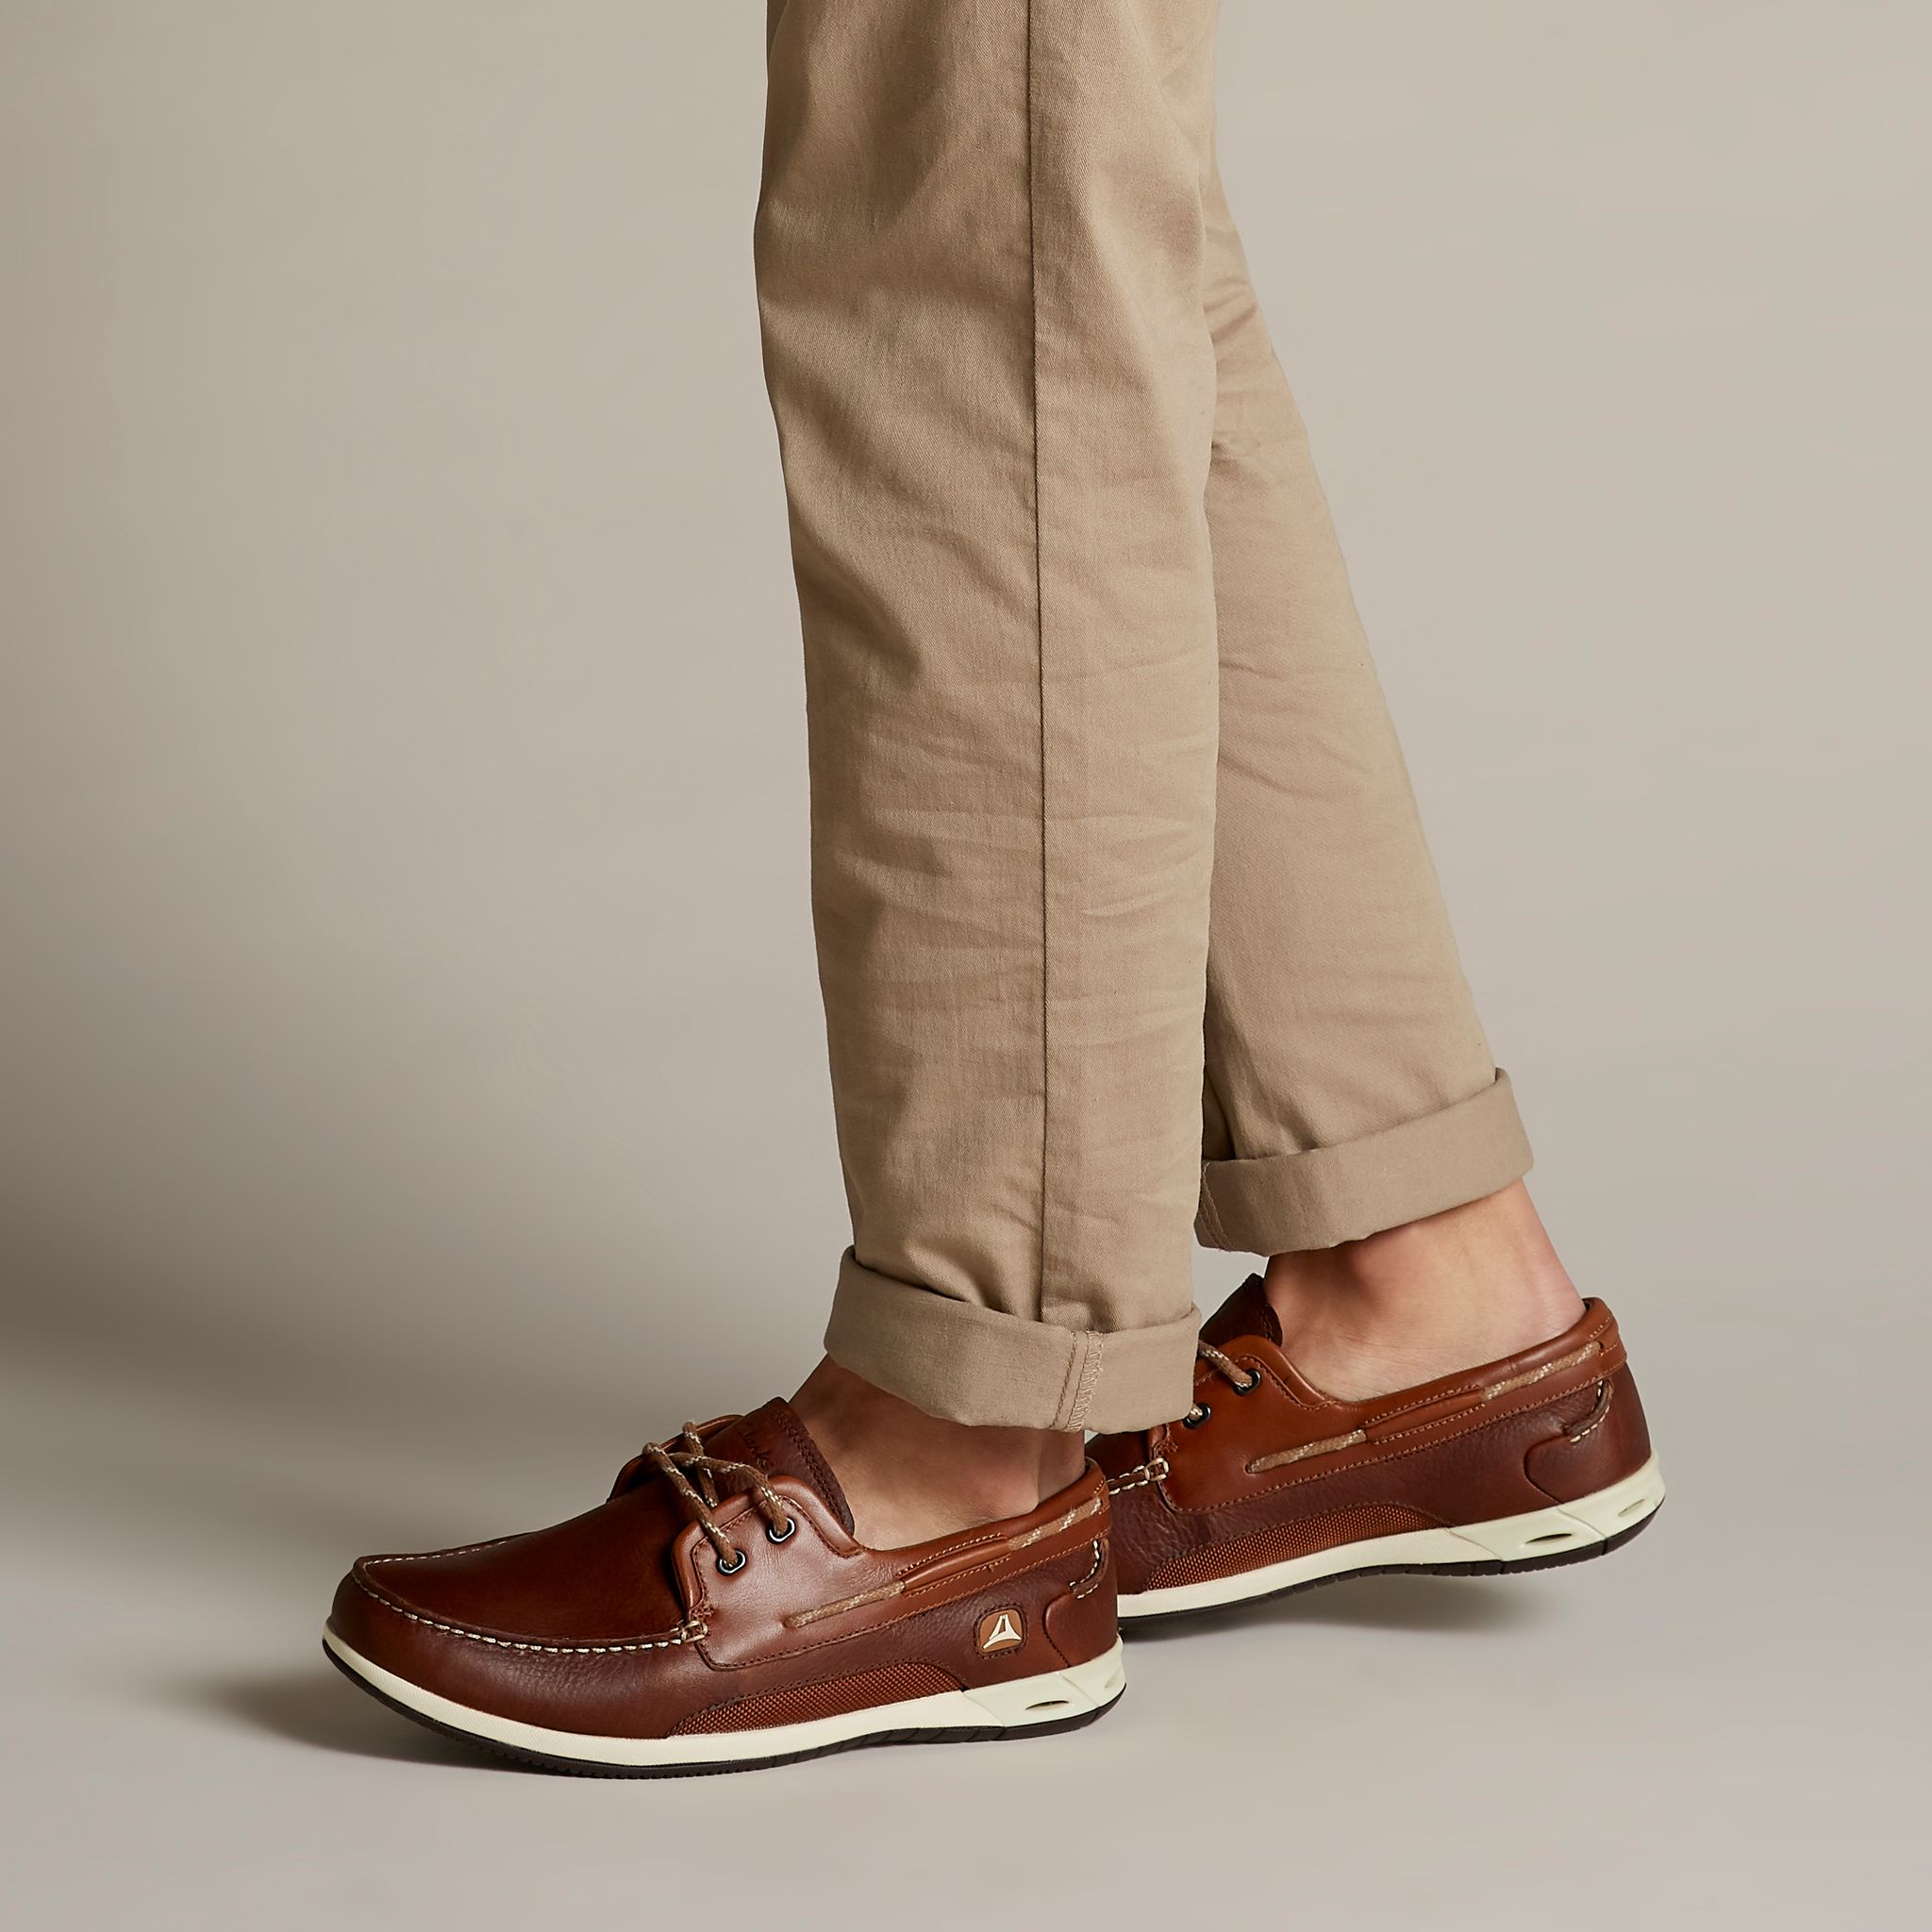 Clarks Orson Harbour - Brown smooth leather